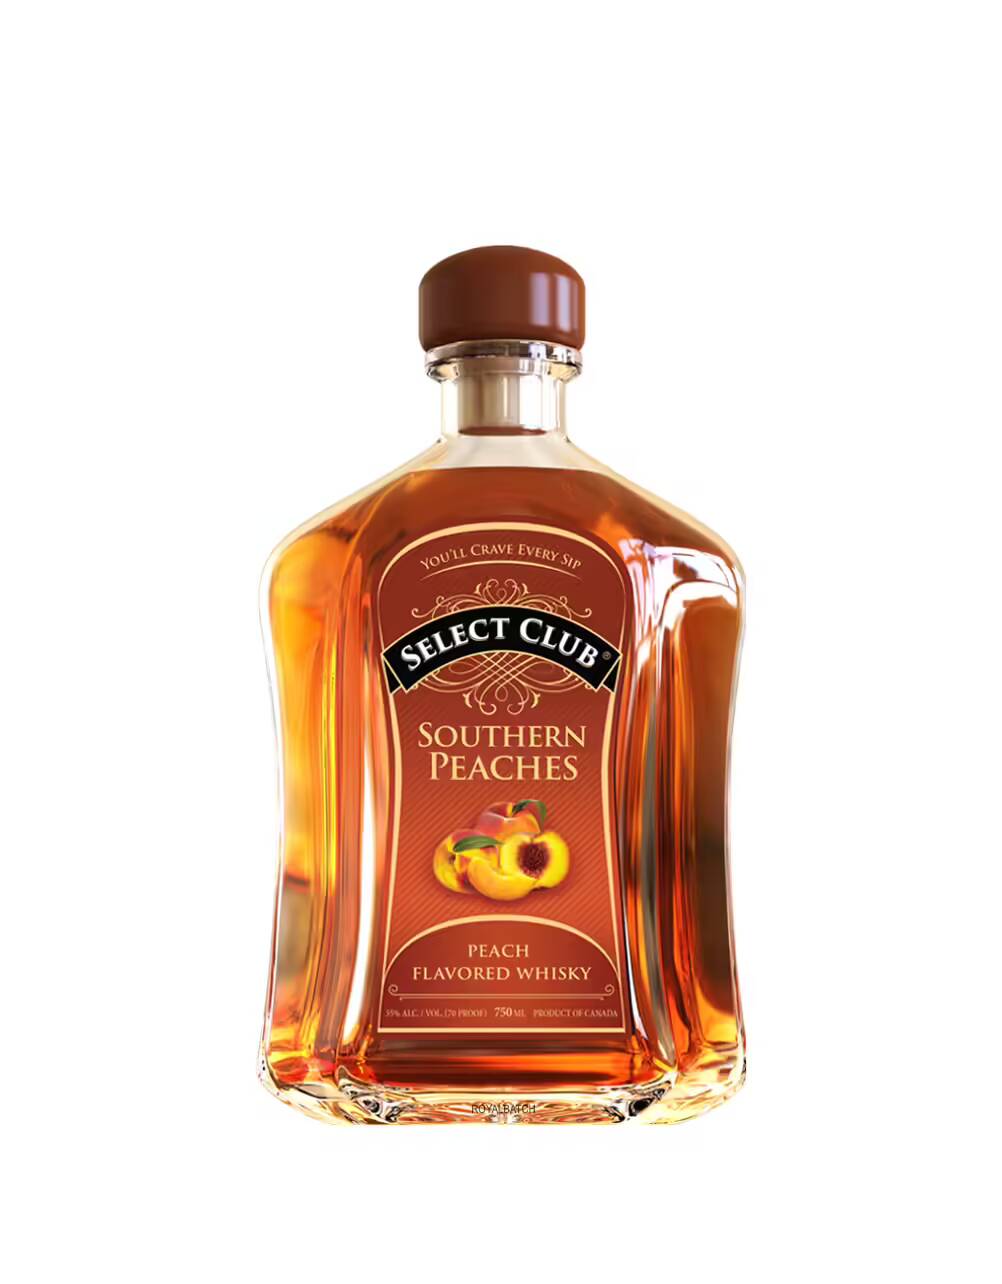 Select Club Southern Peaches Flavored Whisky